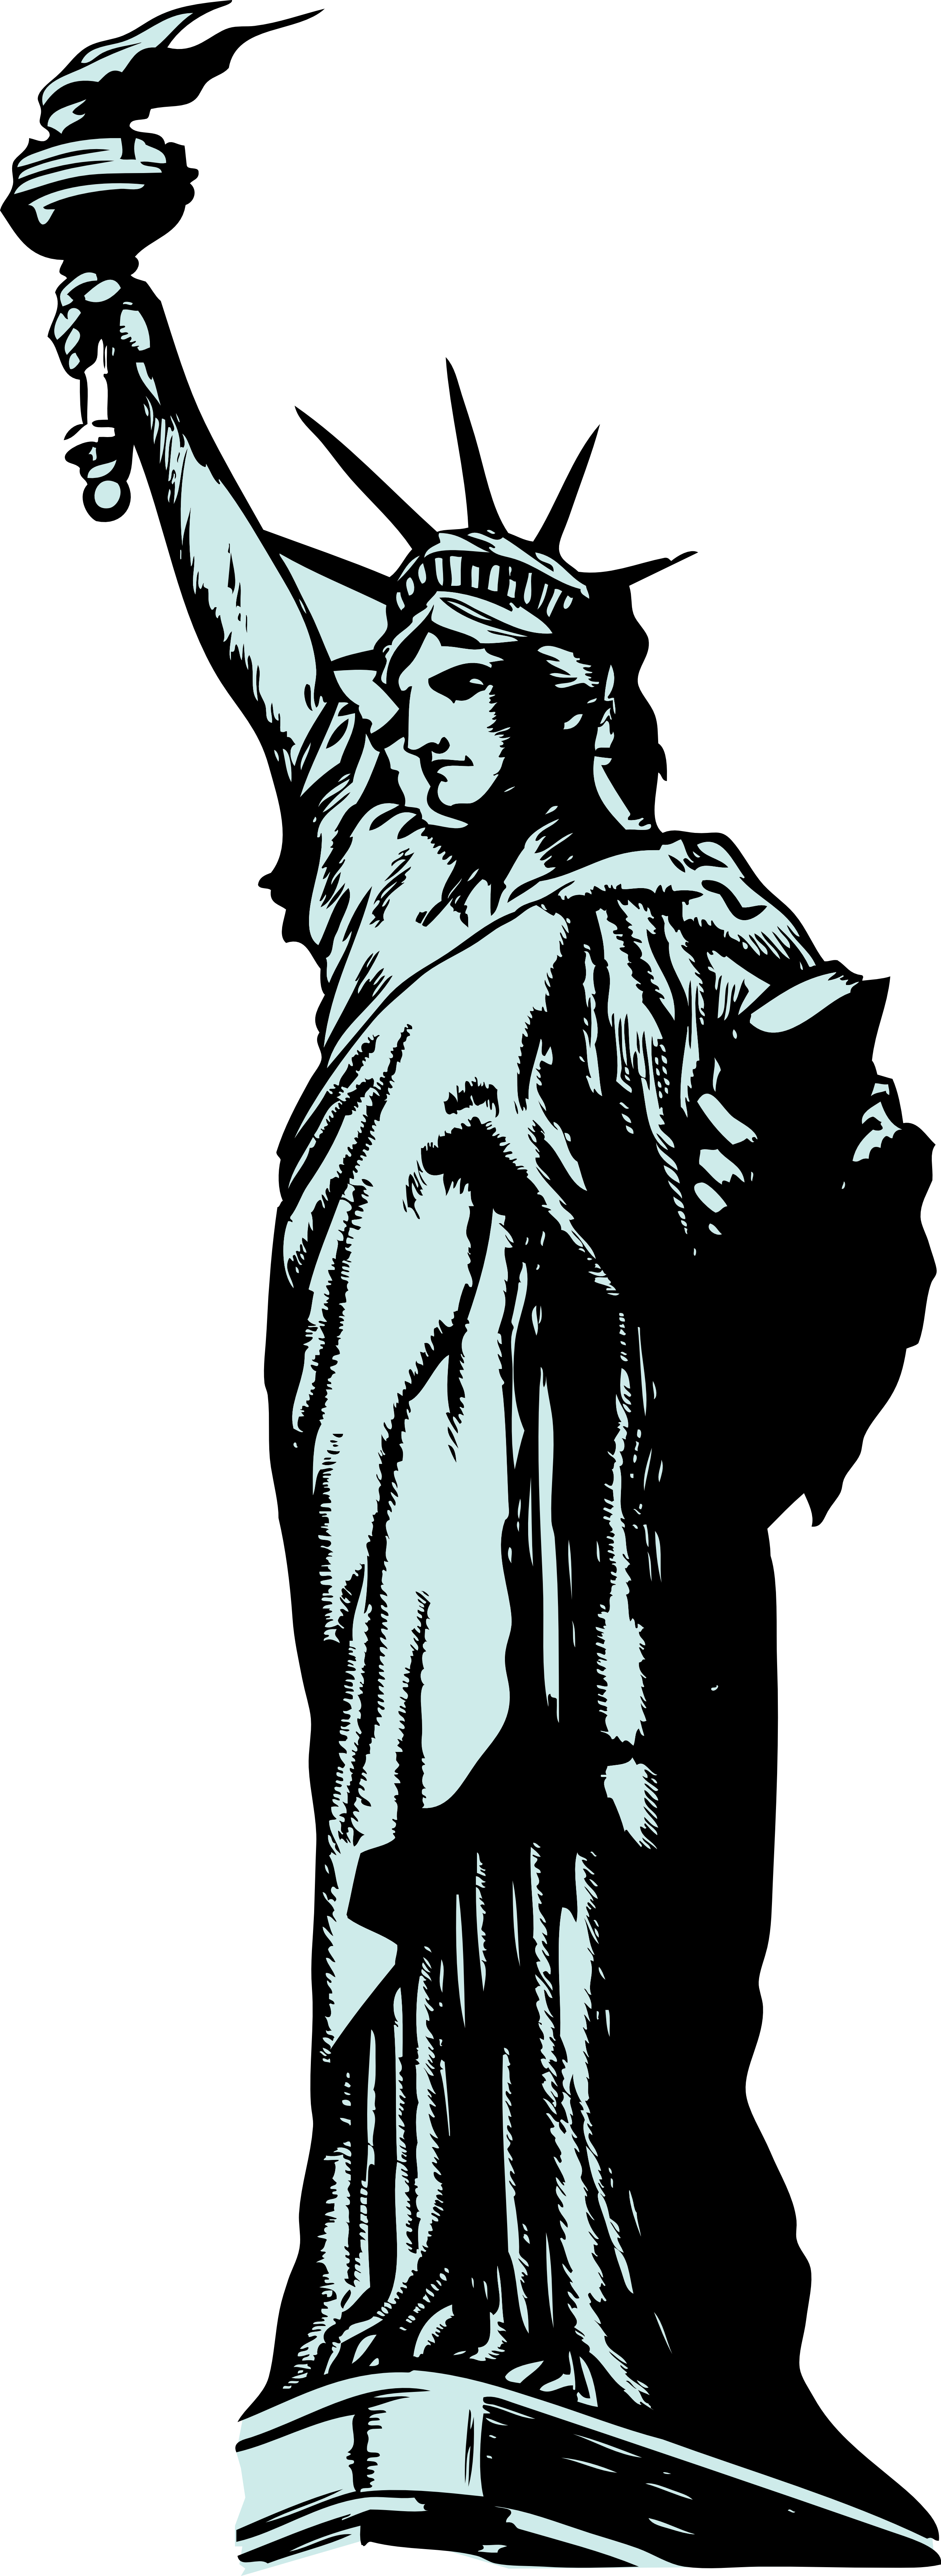 Statue Of Liberty Silhouette Clipart